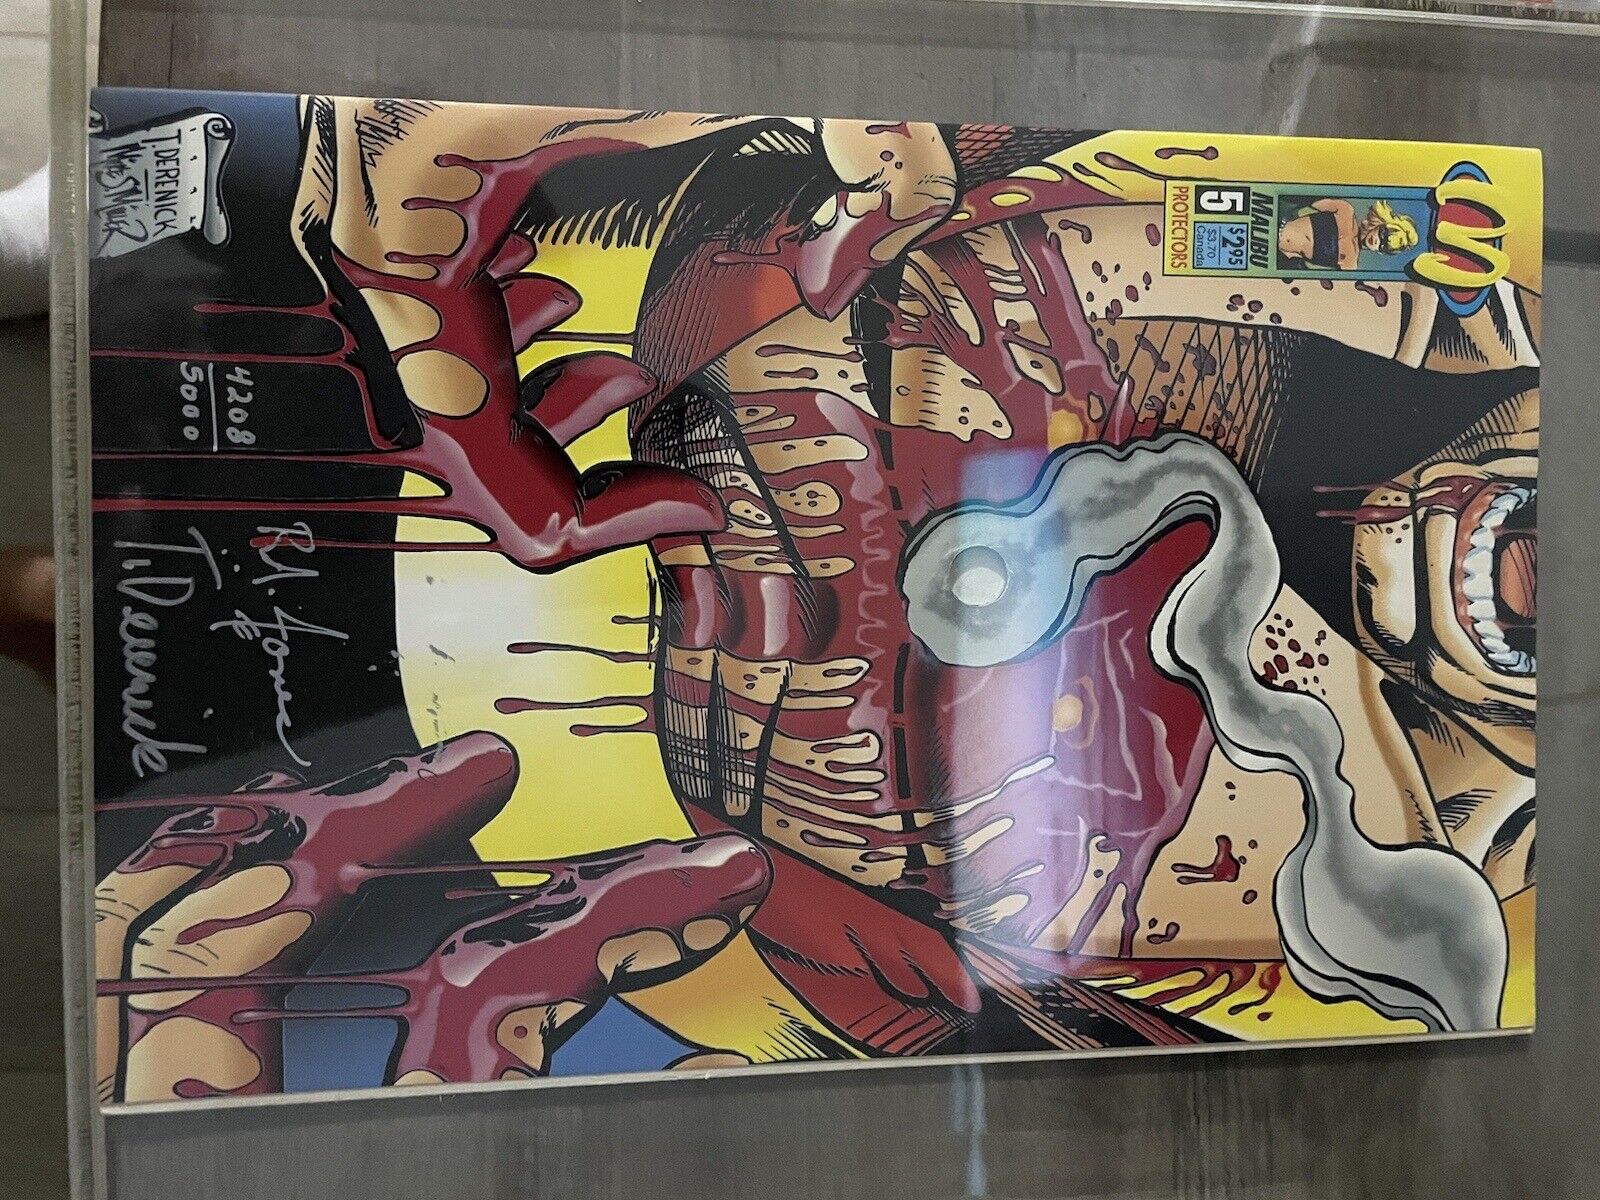 Signed Protectors Comic Book For Sale… Signed By The Author